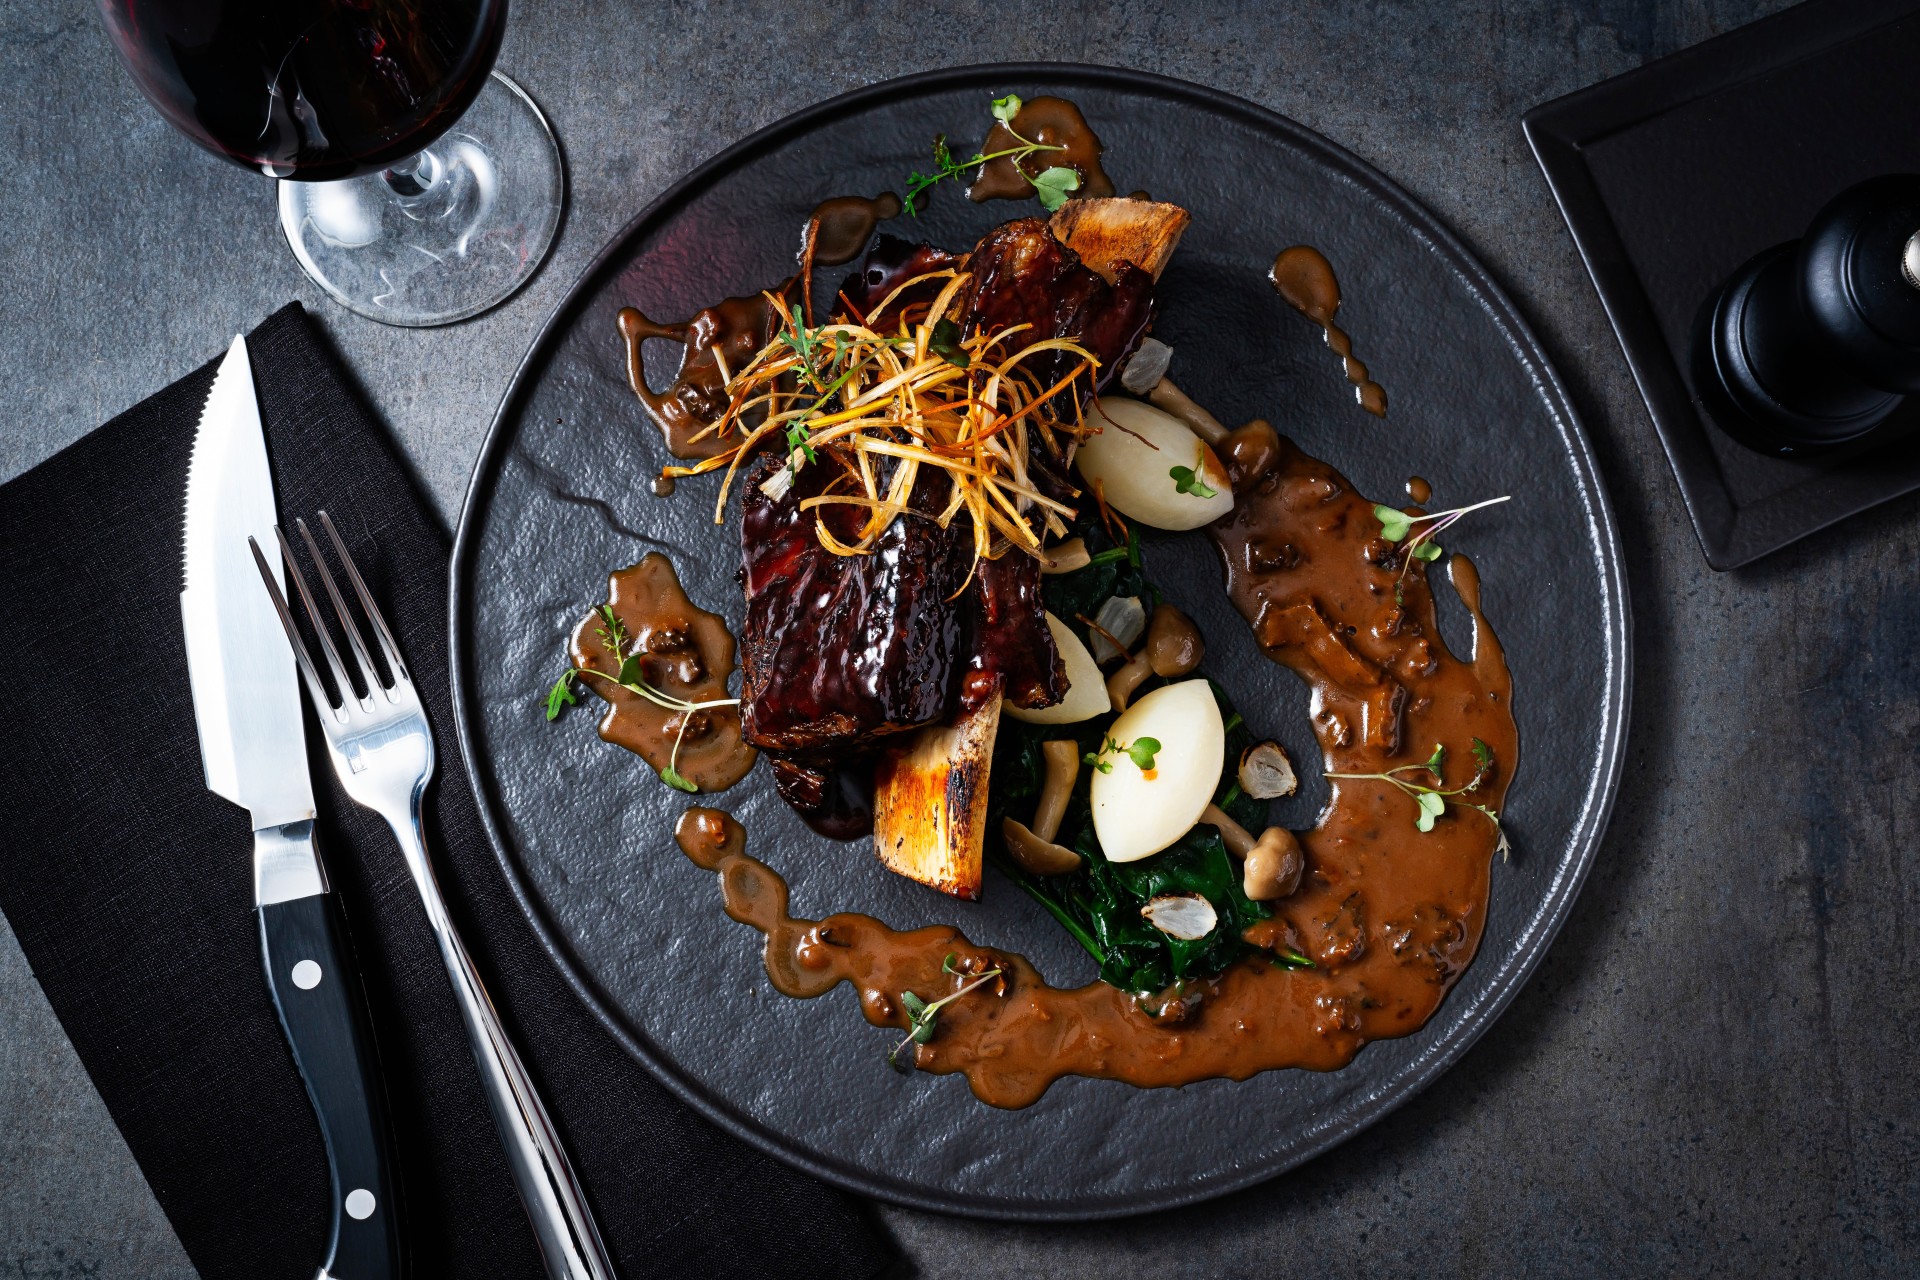 Seared Short Ribs with Red wine & beer sauce